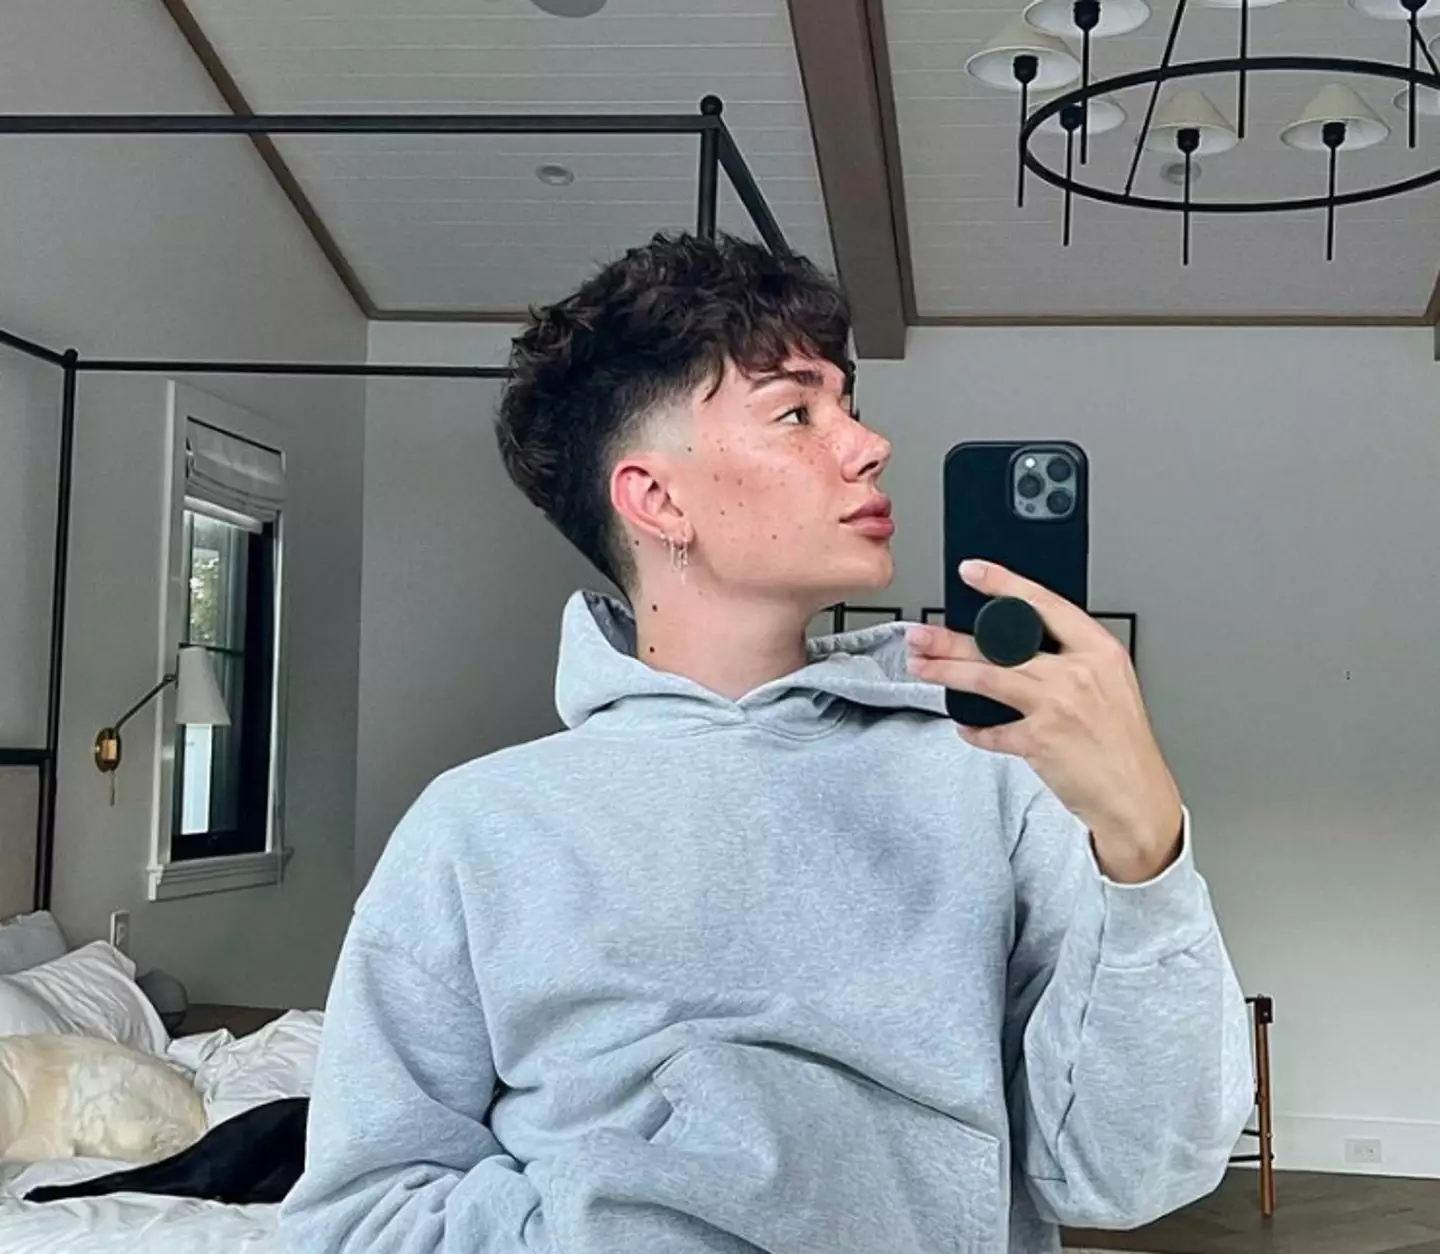 James Charles rose to fame as a beauty YouTuber.